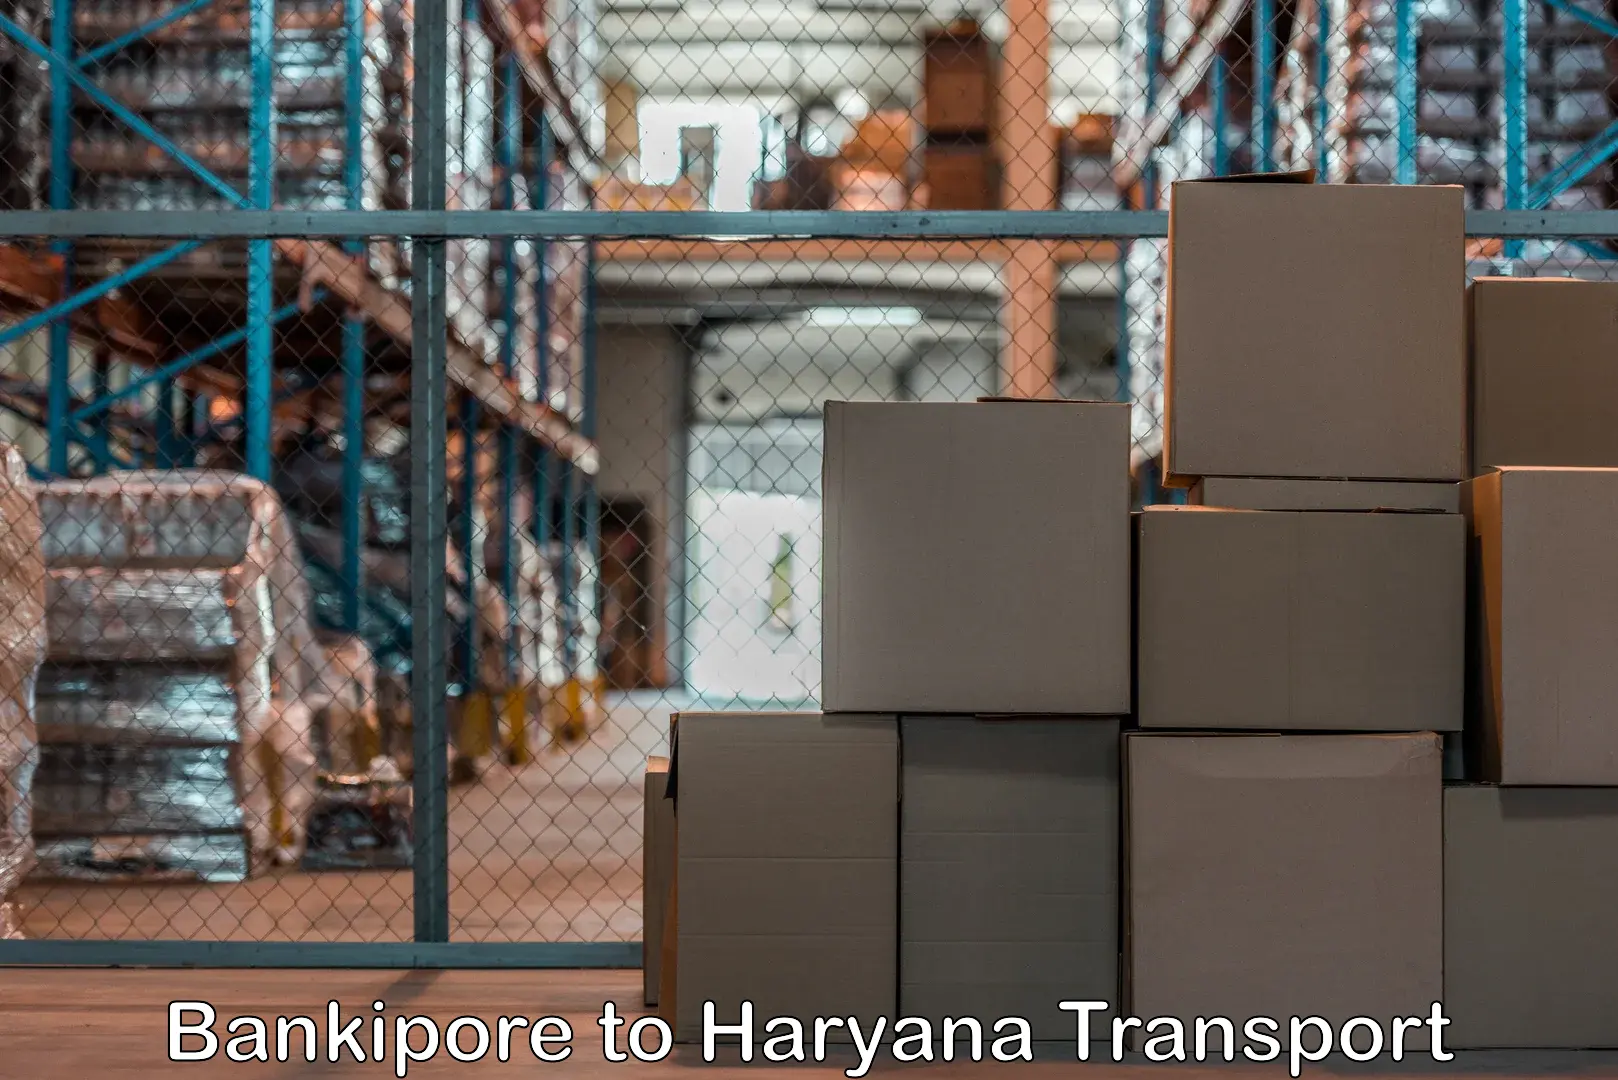 Road transport online services Bankipore to Gurgaon